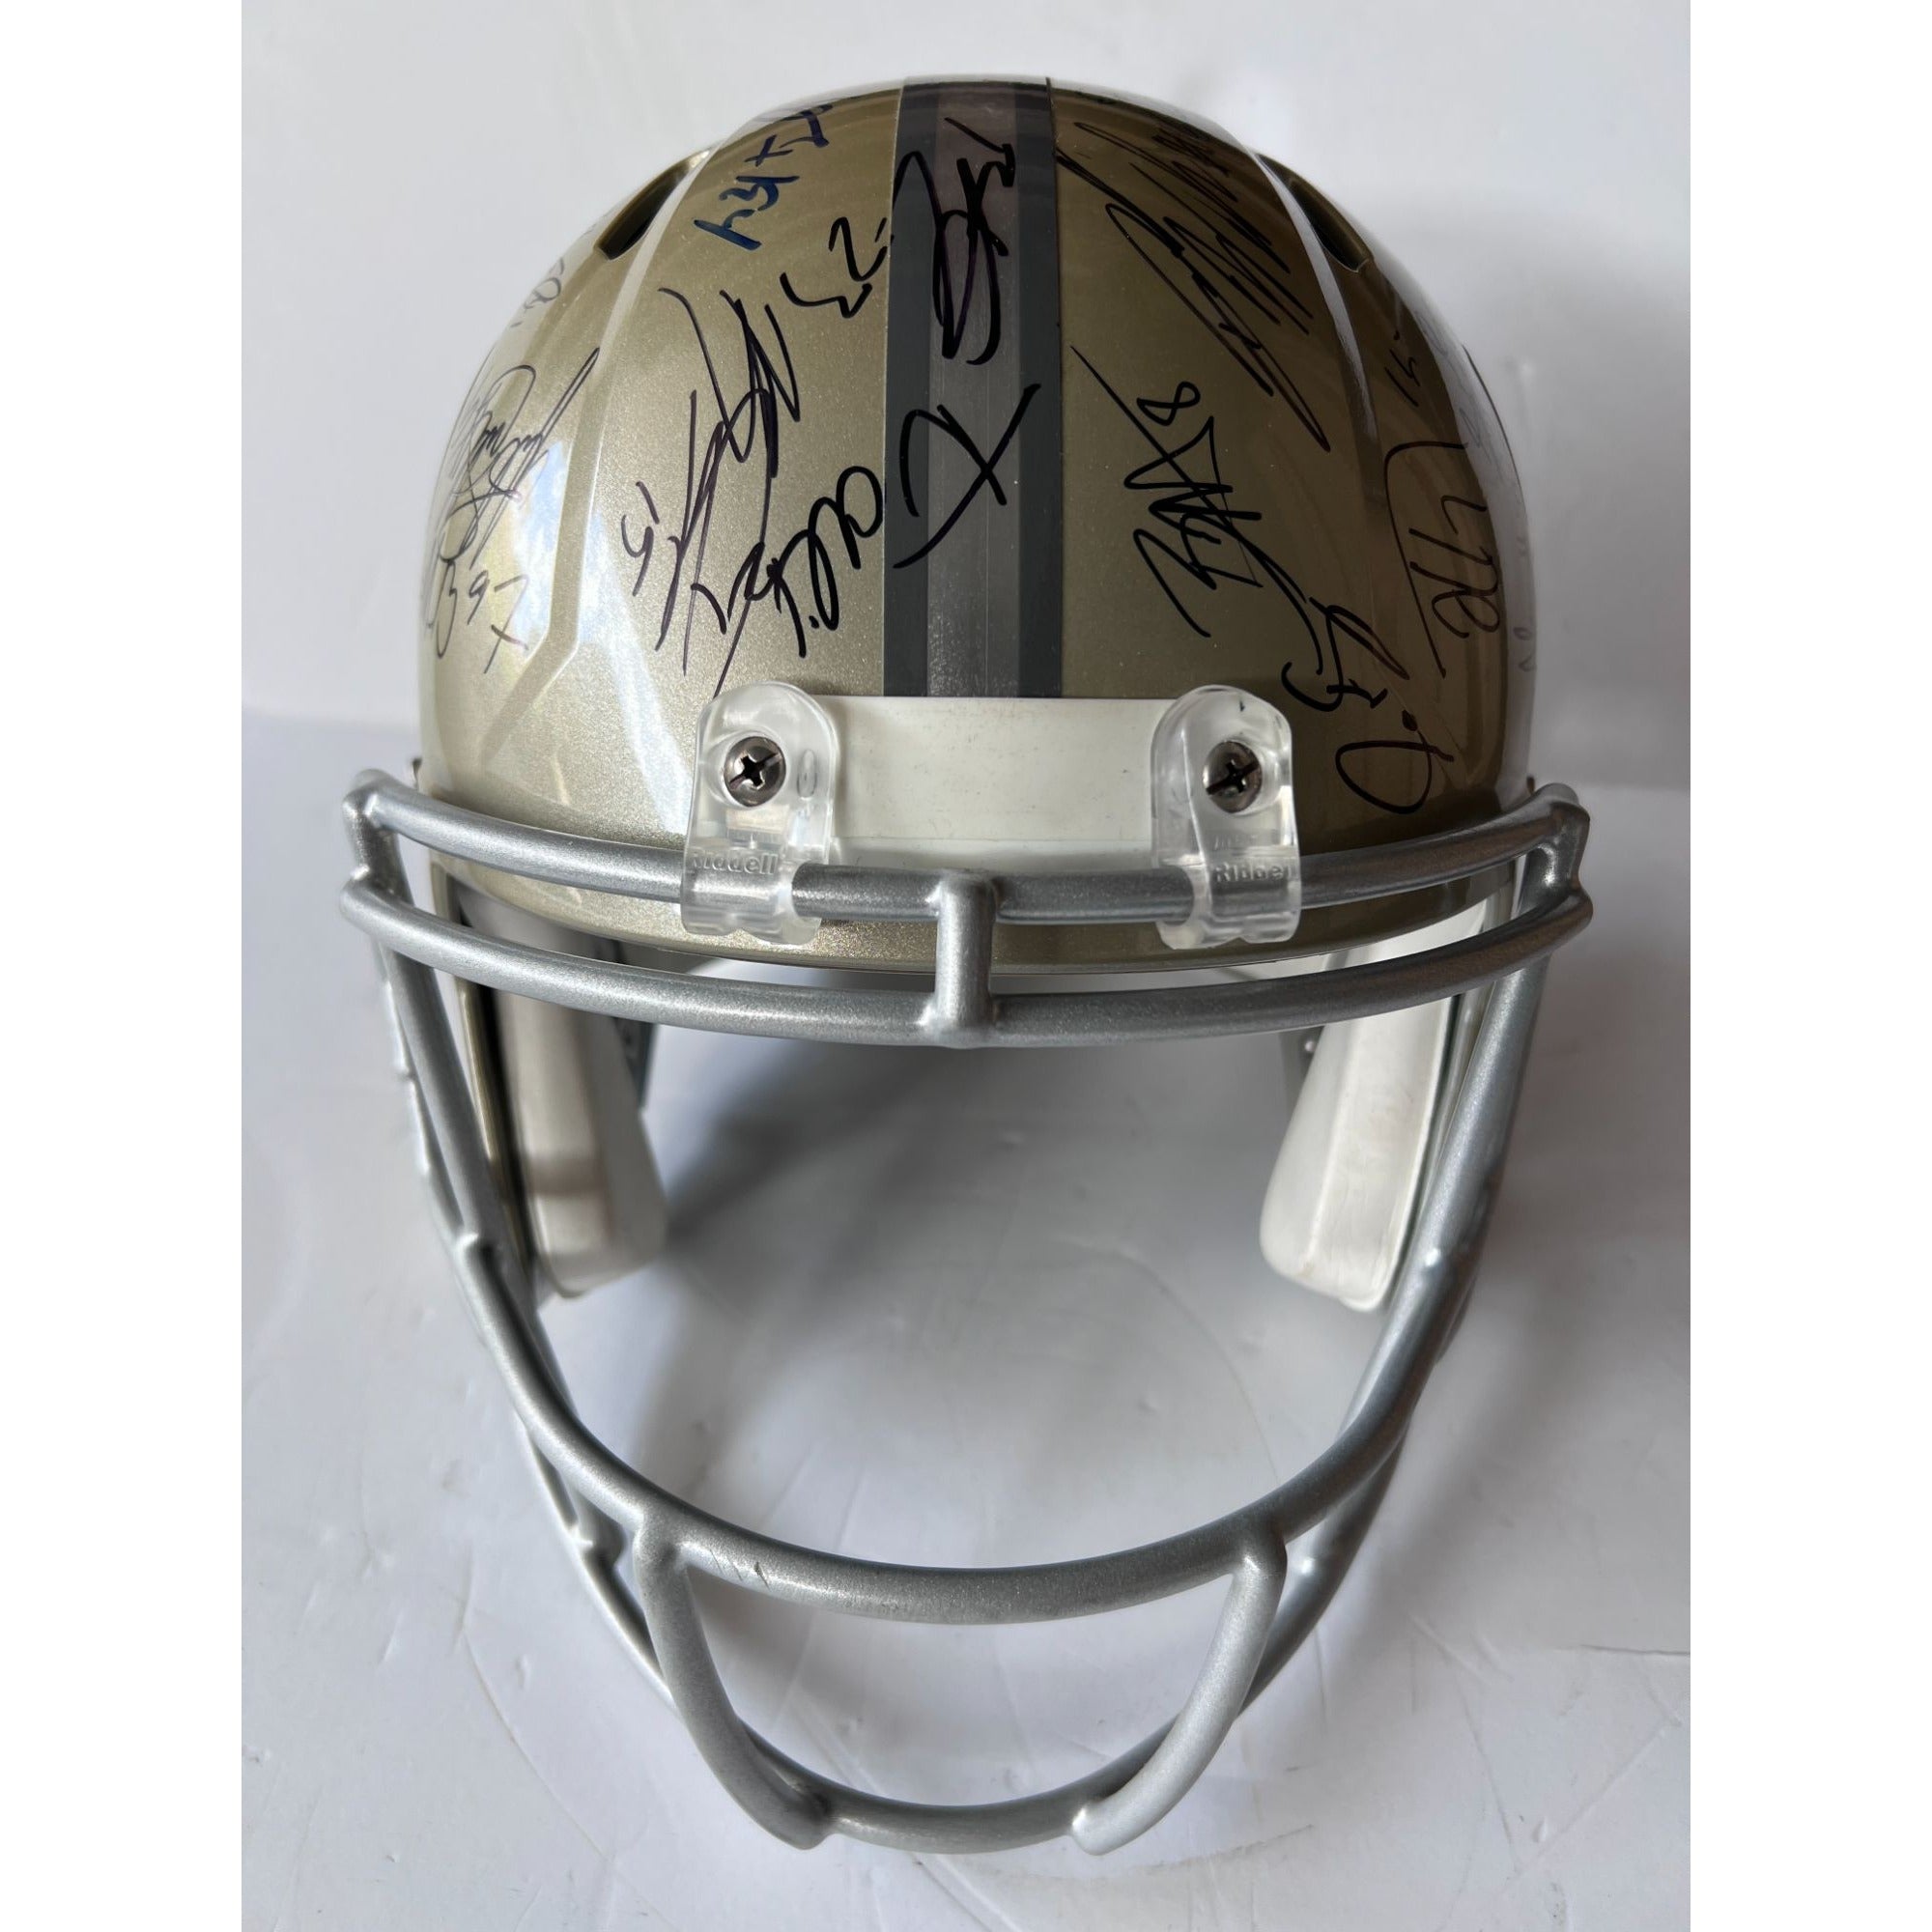 Denver Broncos Peyton Manning Von Miller John Elway Super Bowl 50 2015/16 team signed replica helmet with proof $2,499 with free acrylic dis